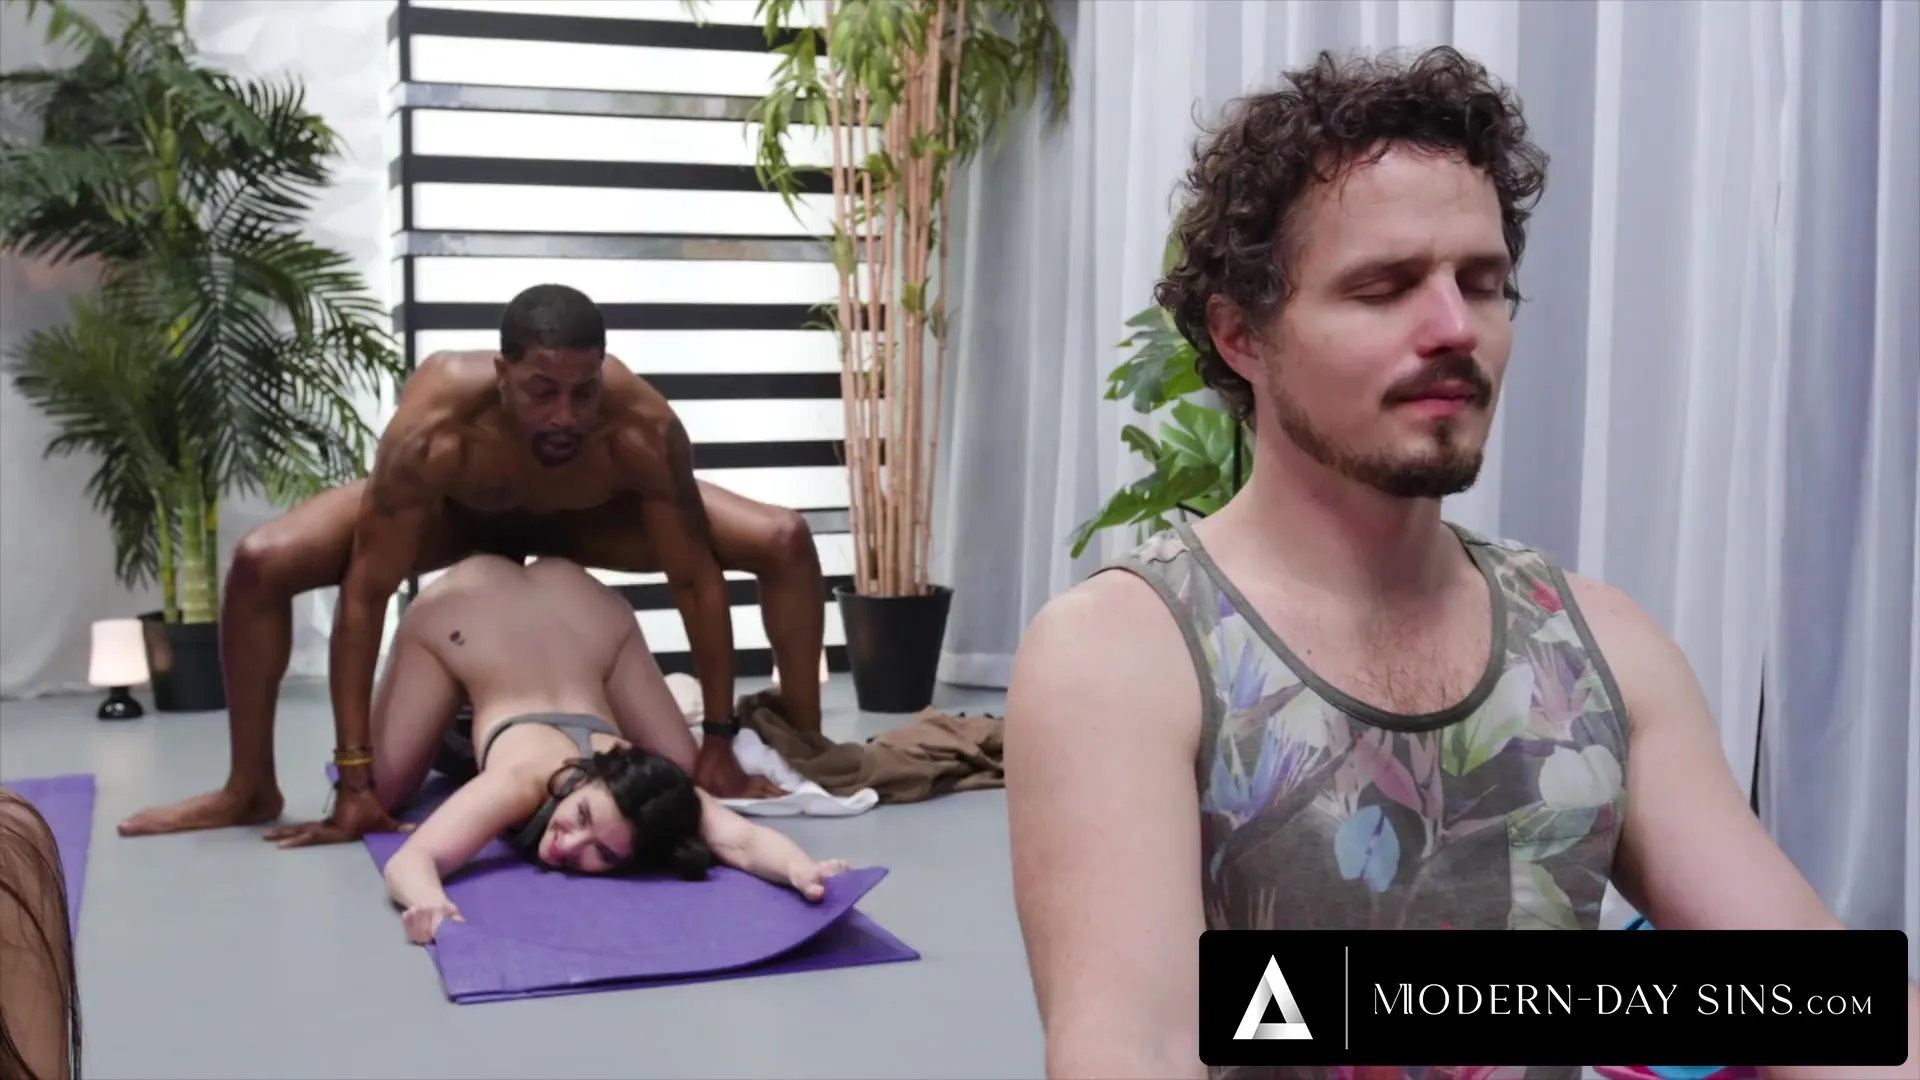 Big ass whore cheating with a yoga instructor behind her bfs back hq nude image